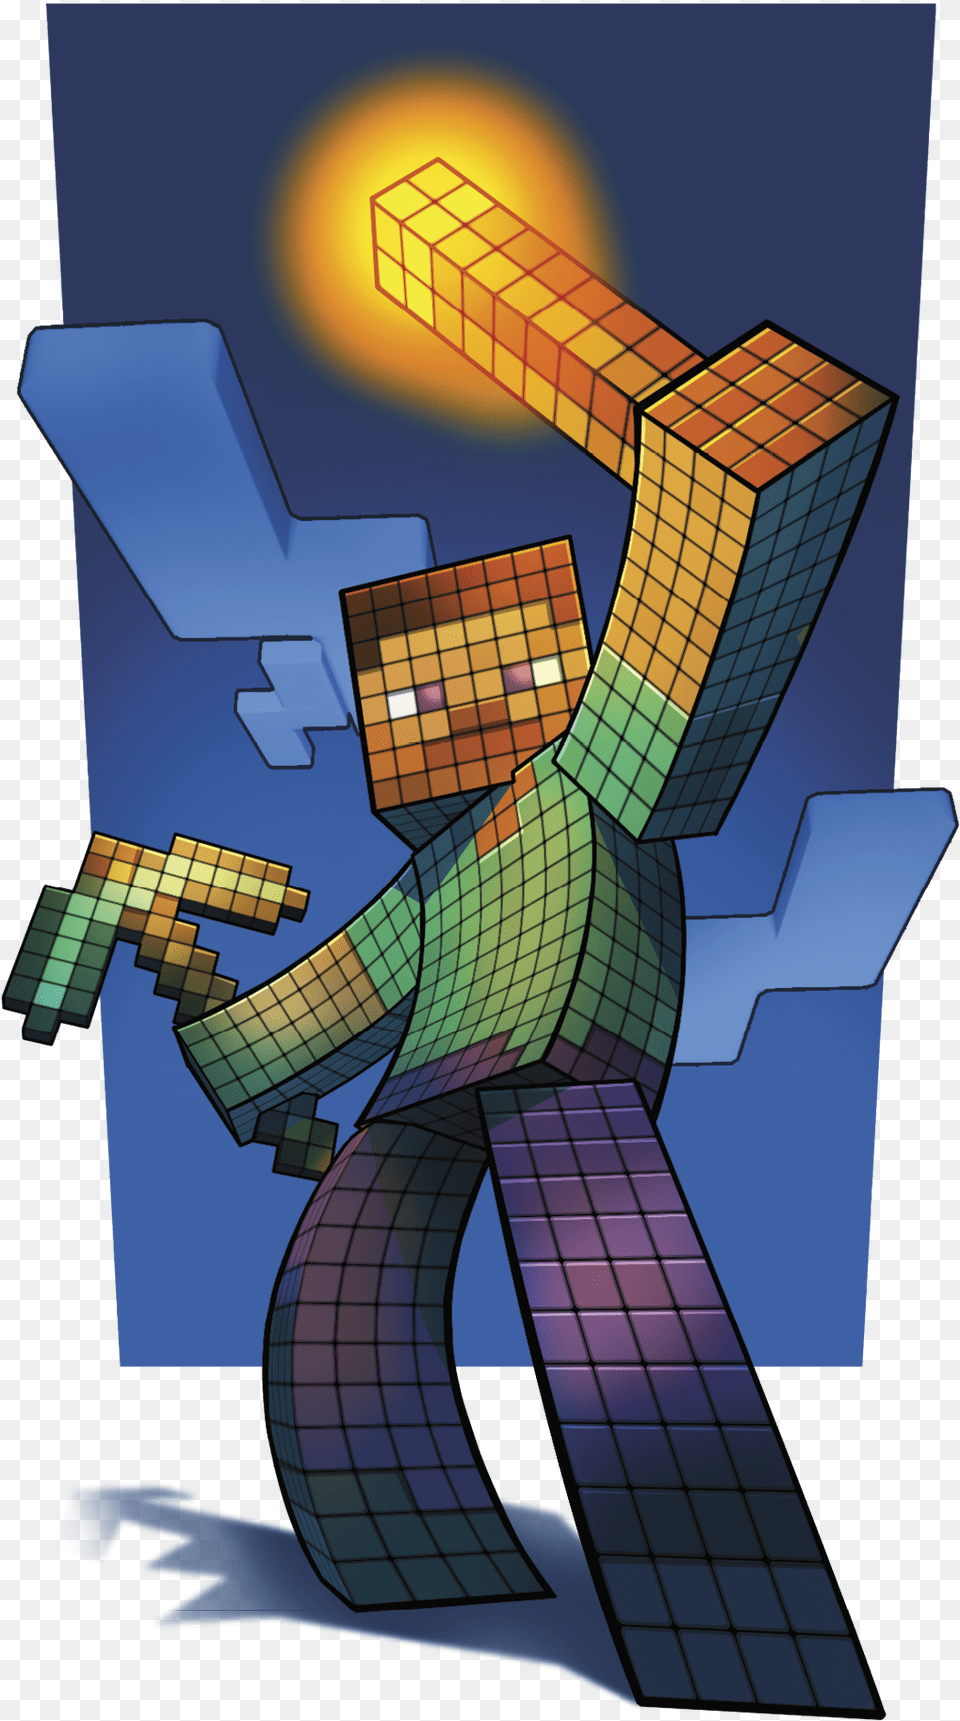 Not An Officially Licensed Minecraft Product Cartoon Png Image